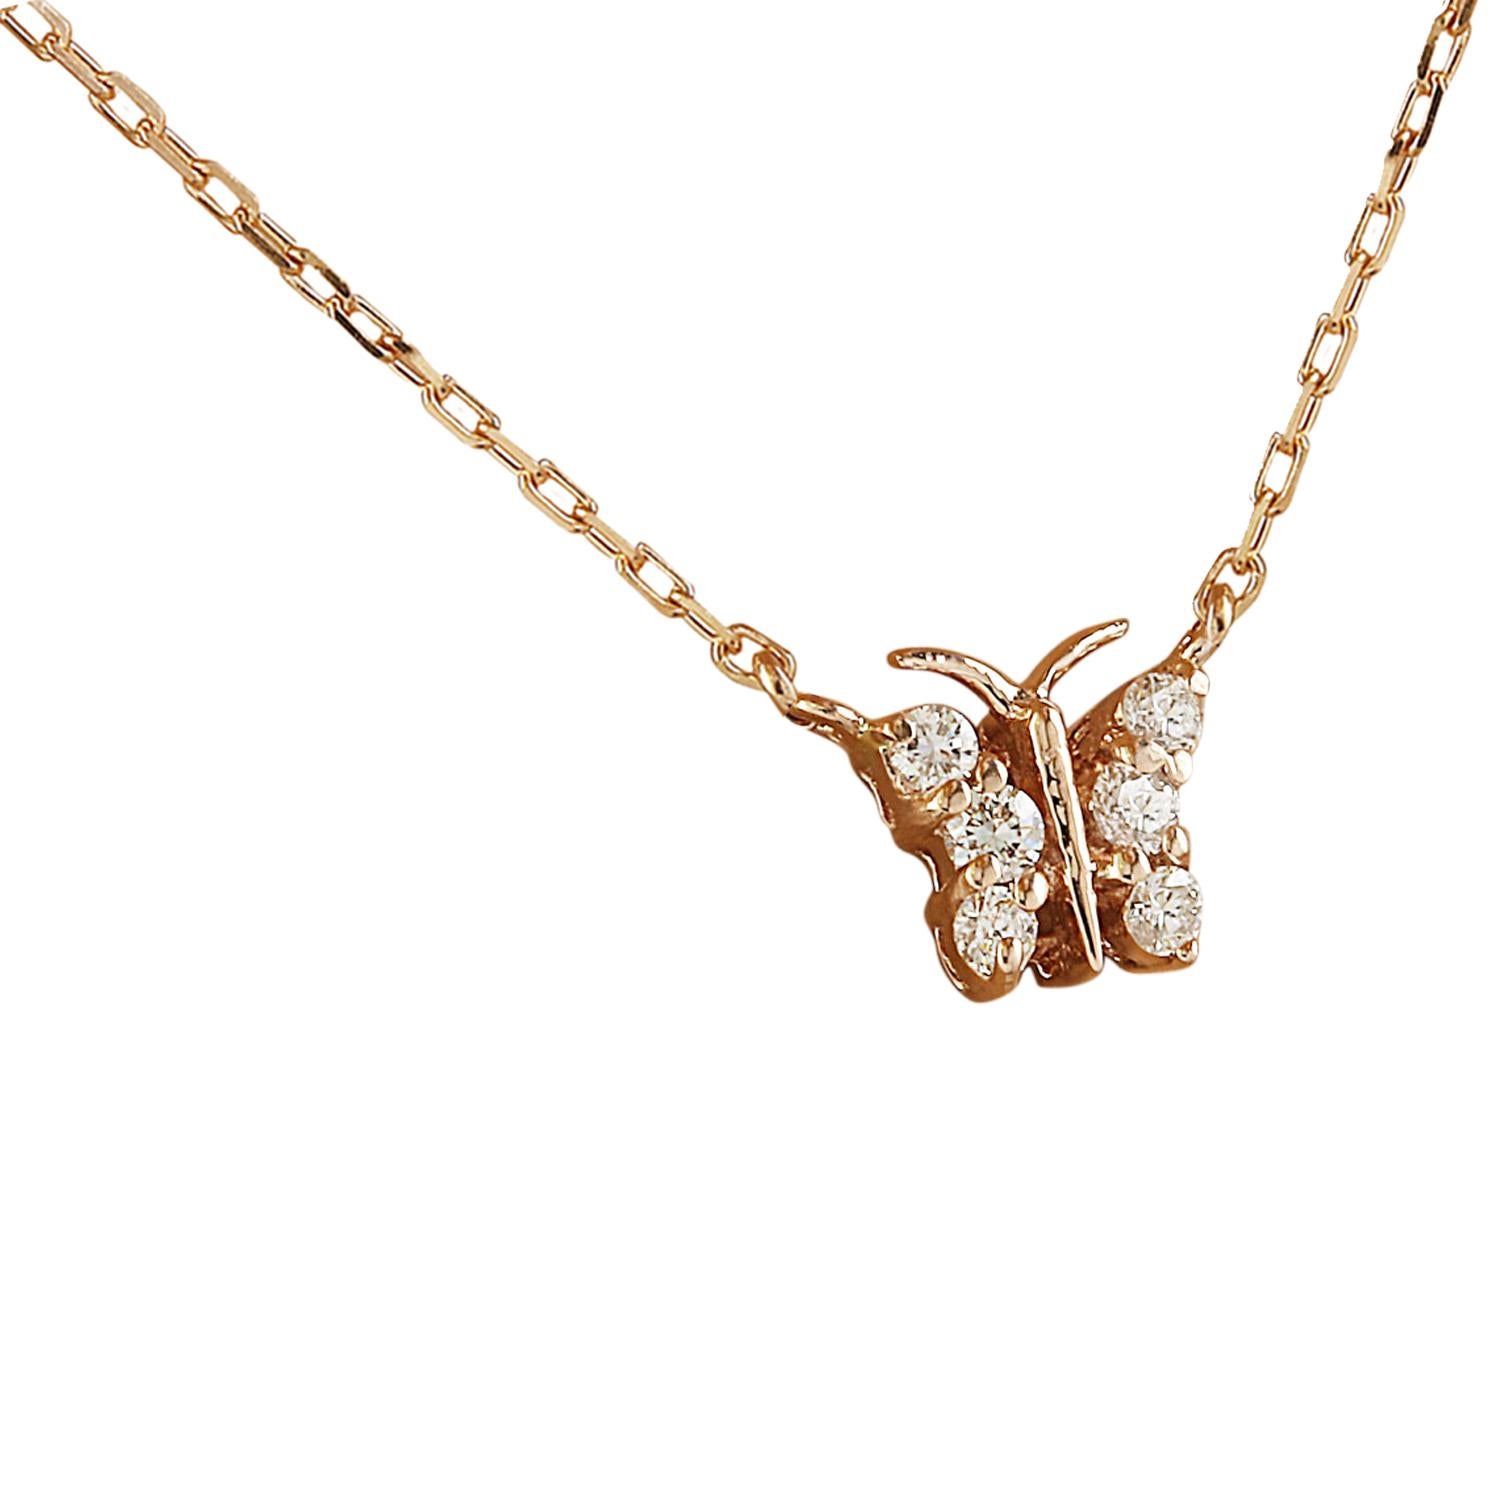 Introducing our enchanting 0.20 Carat Natural Diamond Butterfly Necklace crafted in exquisite 14 Karat Rose Gold. Each delicate detail of this piece reflects the highest standards of craftsmanship and elegance. The necklace is elegantly stamped with